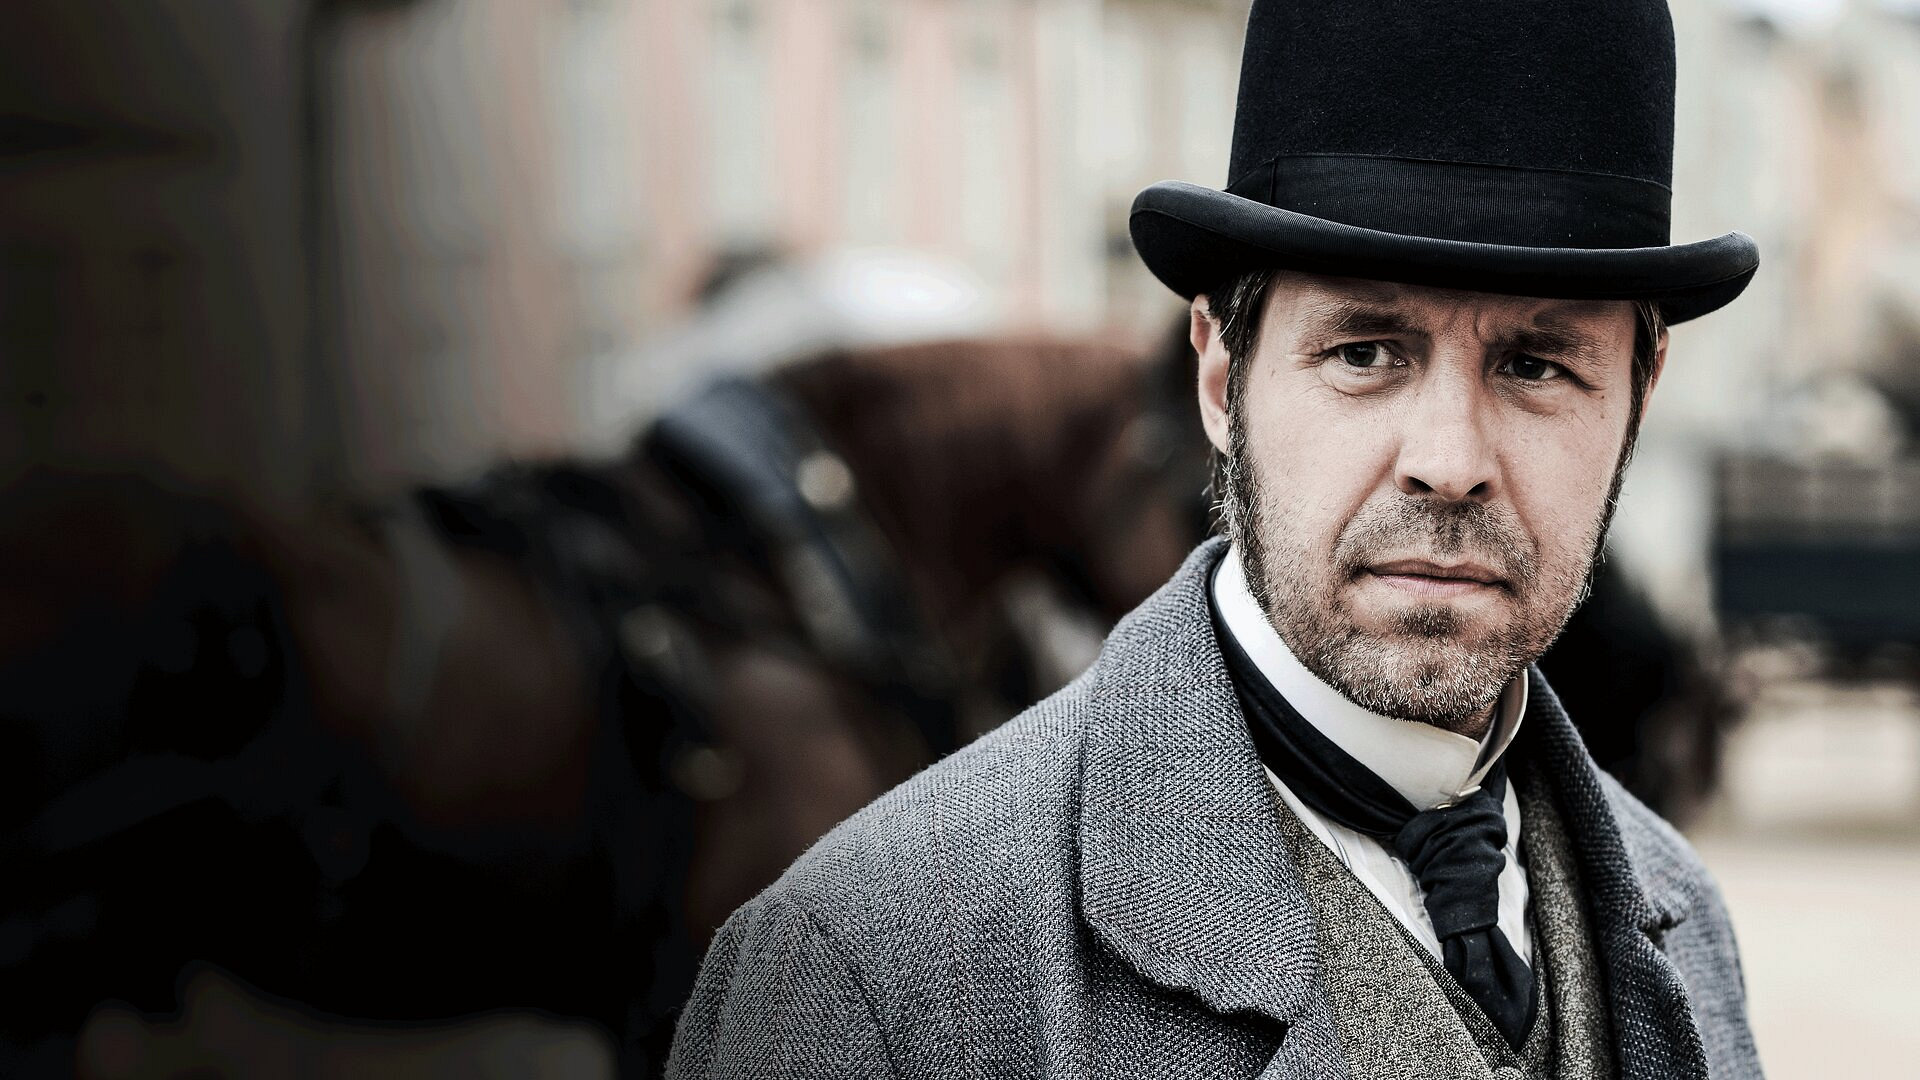 The Suspicions of Mr. Whicher: The Ties that Bind